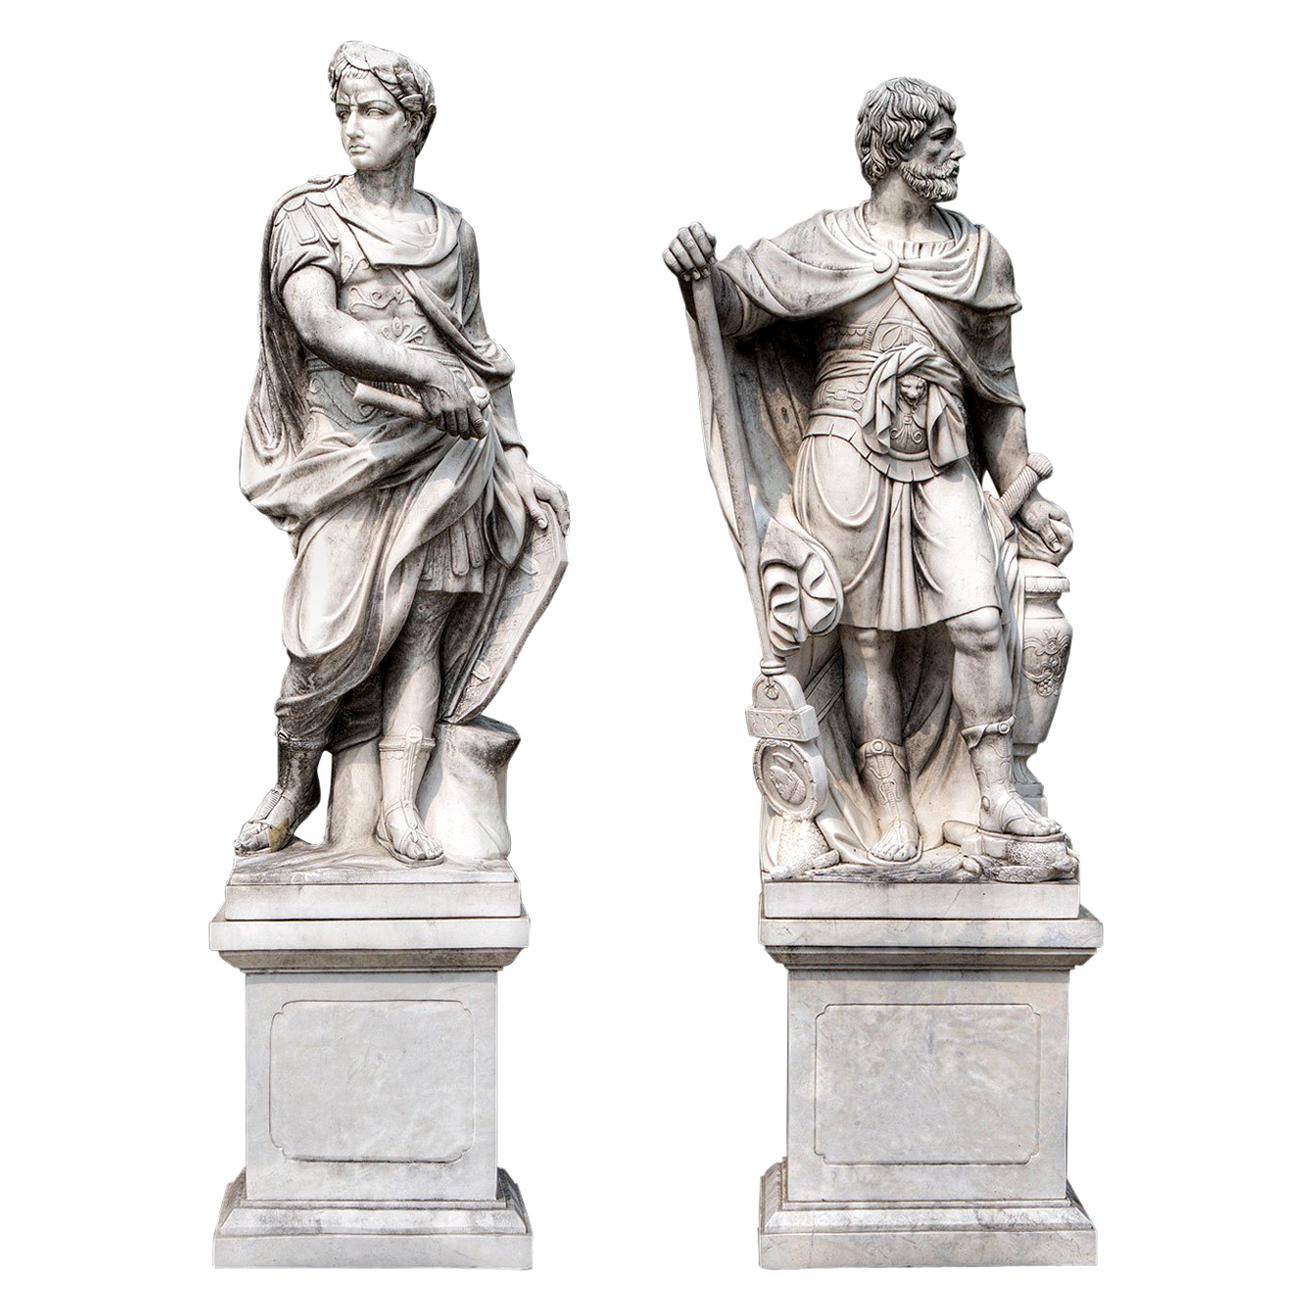 Monumental Pair of White Marble Statue of Classical Roman Figures